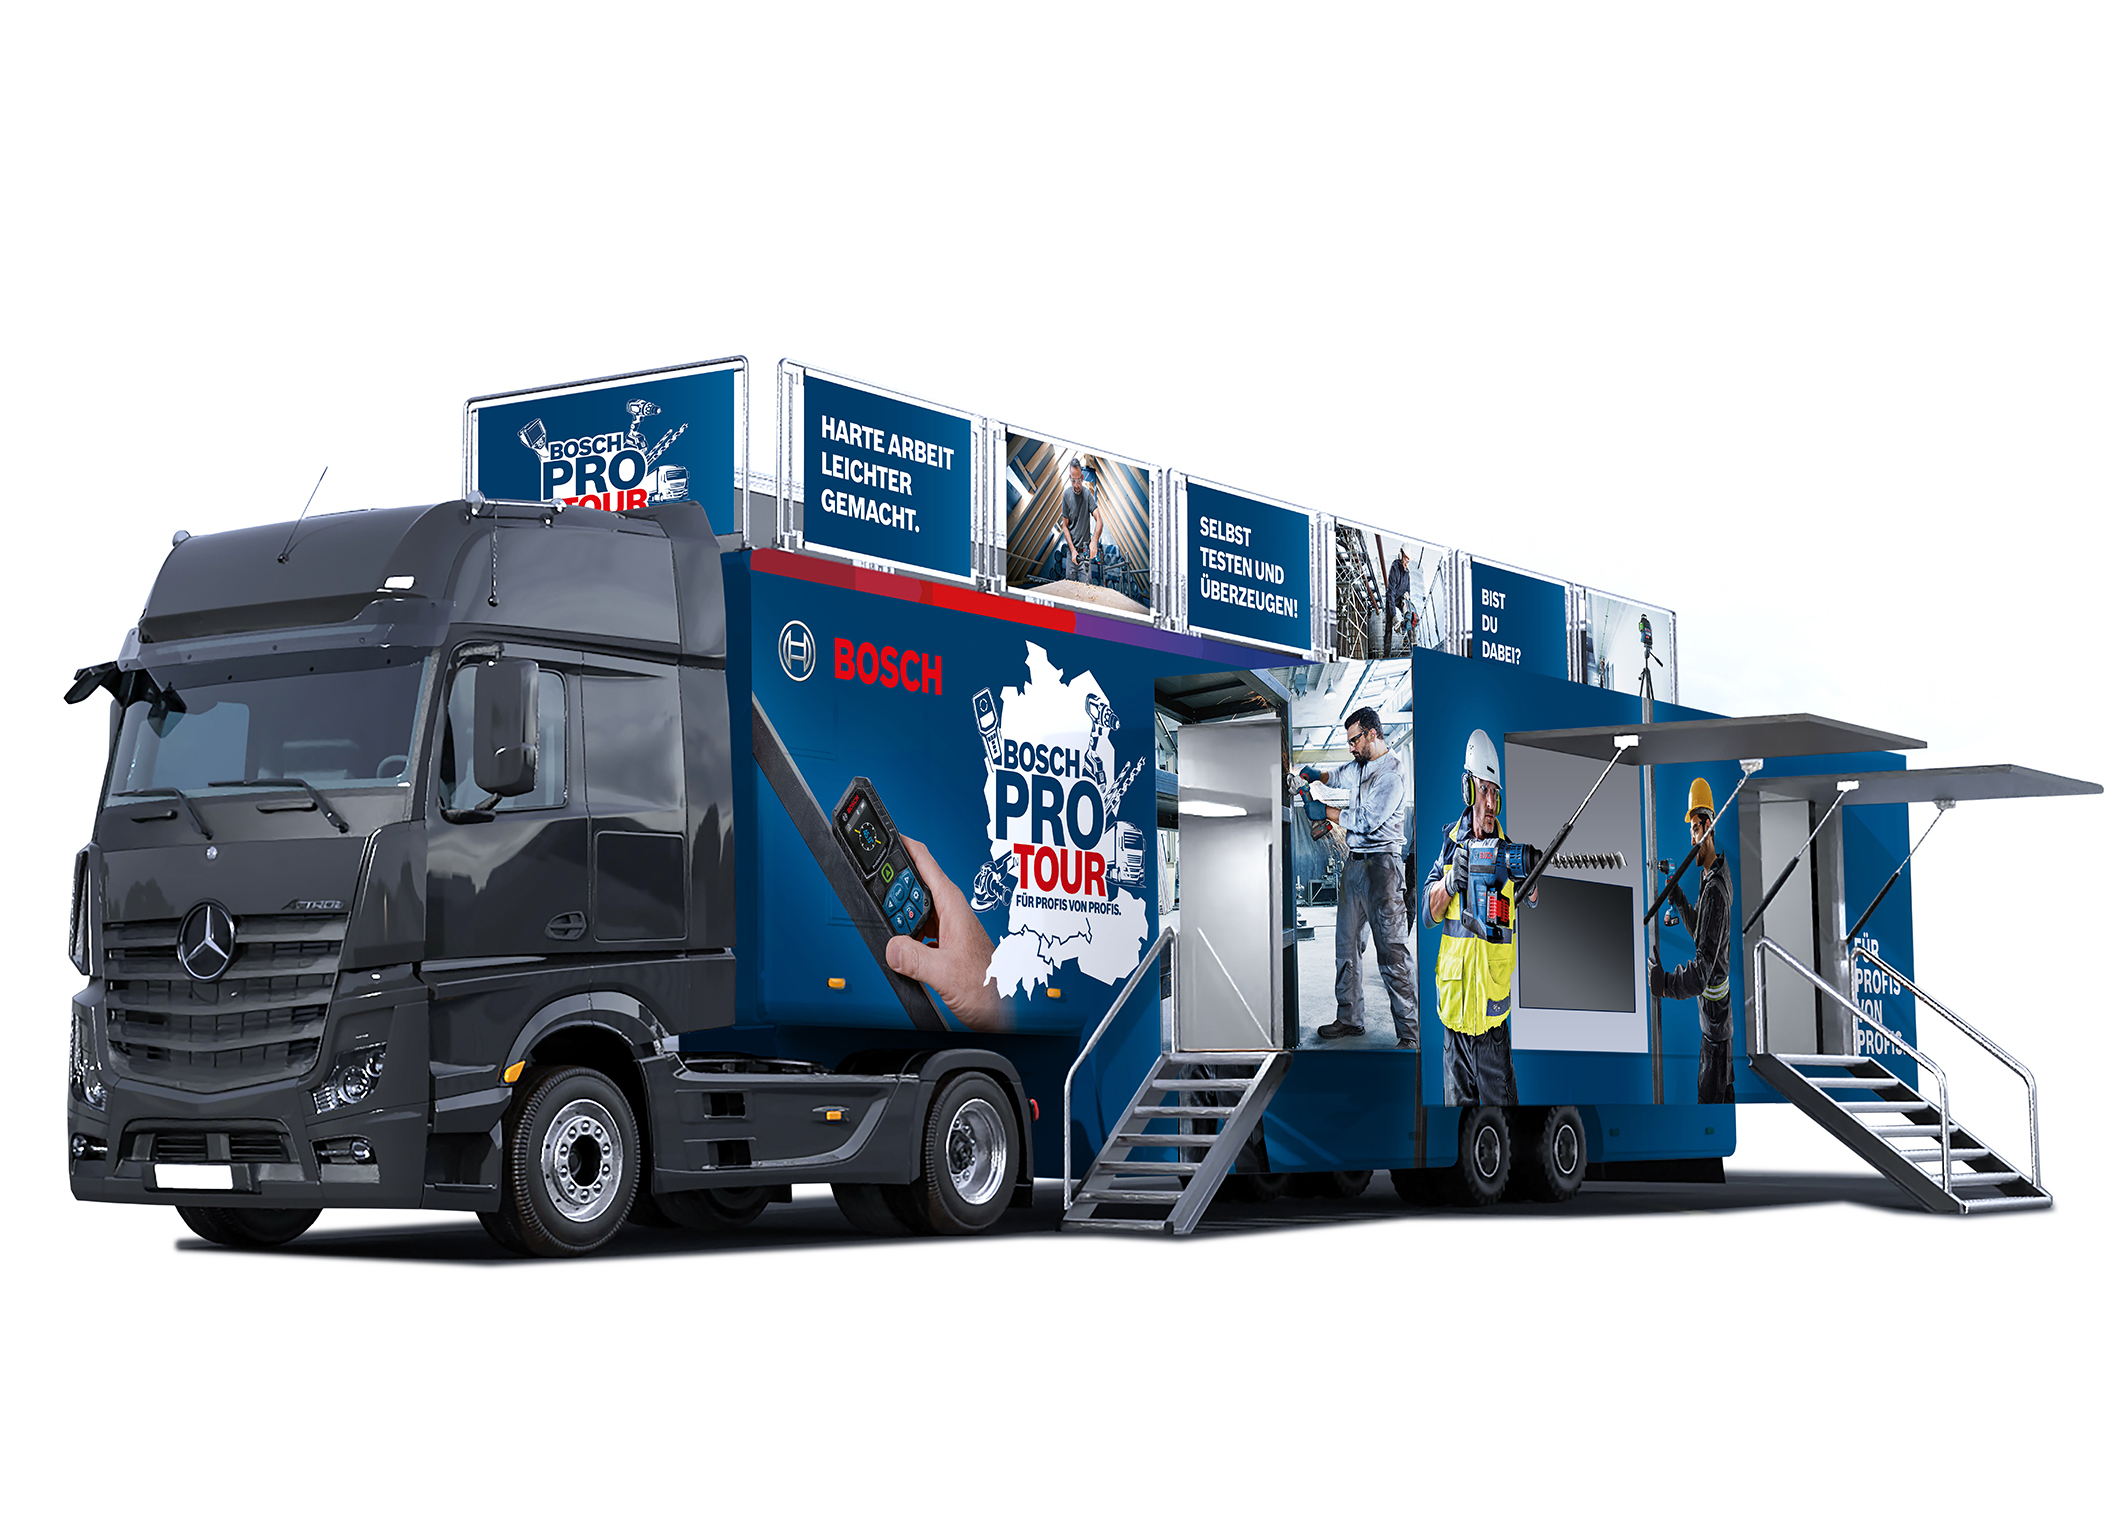 Power tools, measuring technology and accessories on tour: Bosch launches mobile experience world for professionals